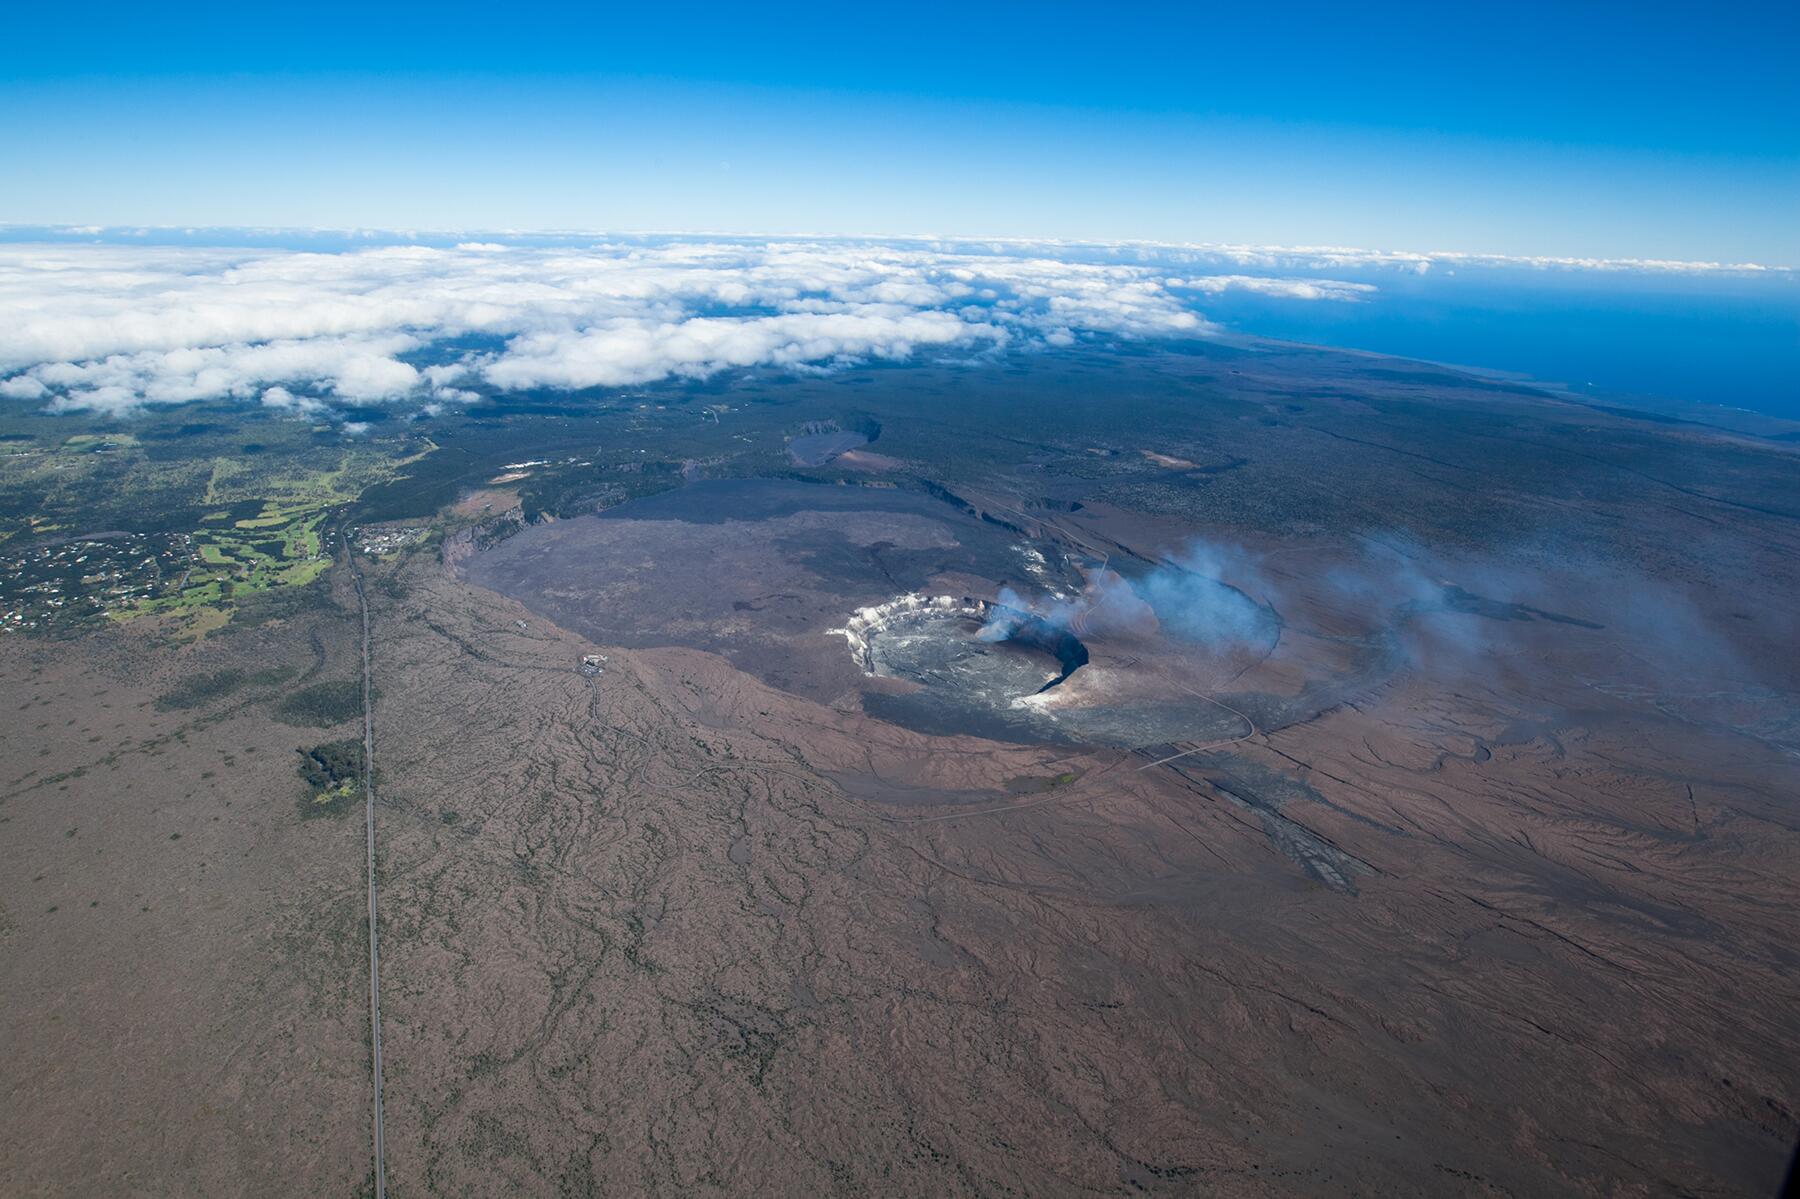 <a href='https://www.fodors.com/world/north-america/usa/hawaii/big-island/experiences/news/photos/18-ultimate-things-to-do-on-hawaiis-big-island#'>From &quot;25 Ultimate Things to Do on Hawaii’s Big Island: Hike the Caldera Floor of the World’s Most Active Volcano&quot;</a>